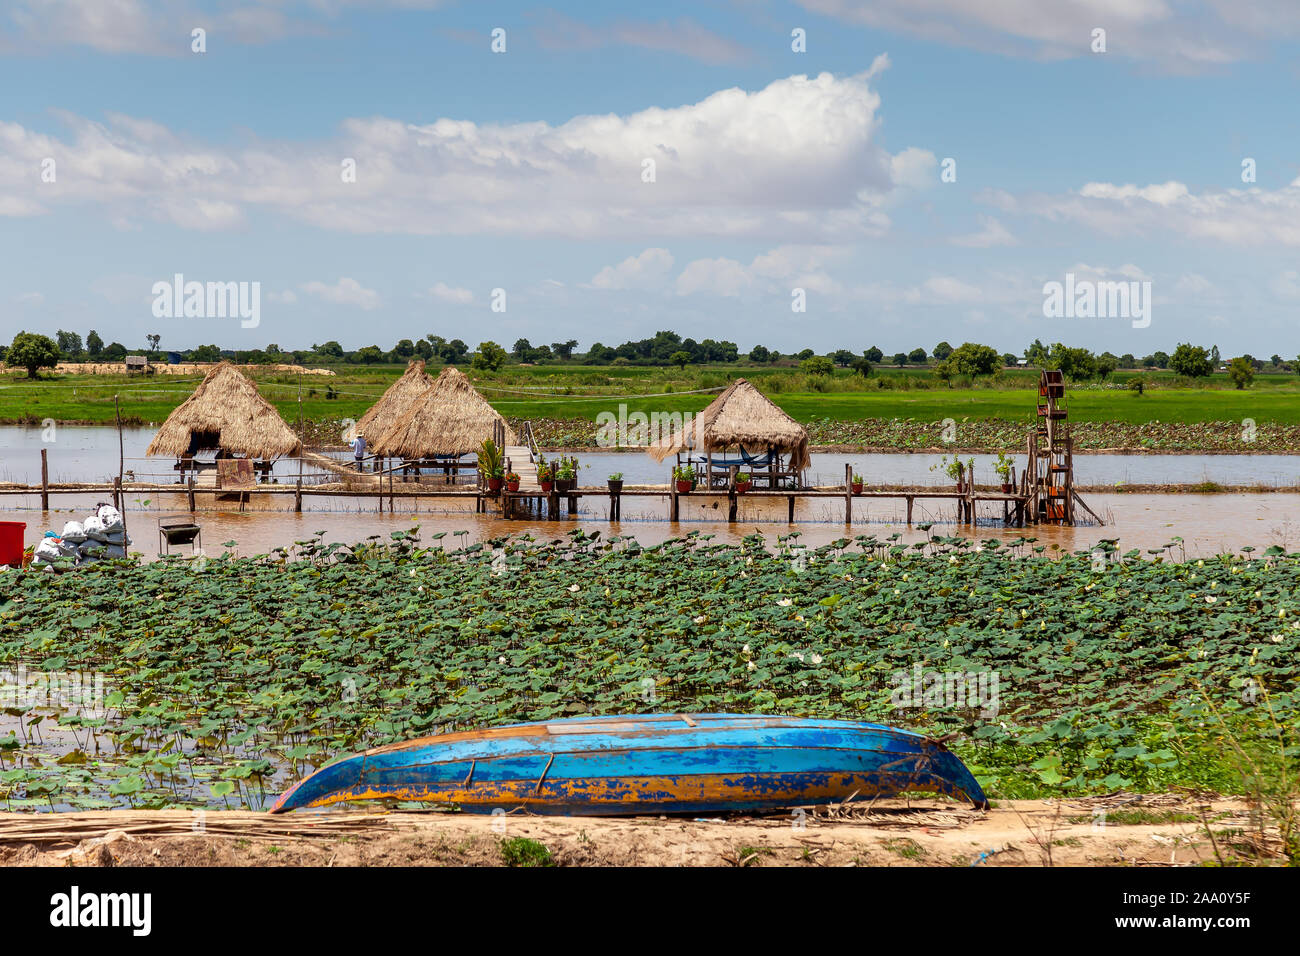 Small lotus farm. Sheds with roof made of reed are sitting in the water almost floating. A blue boat adds to the idyllic scene. Stock Photo